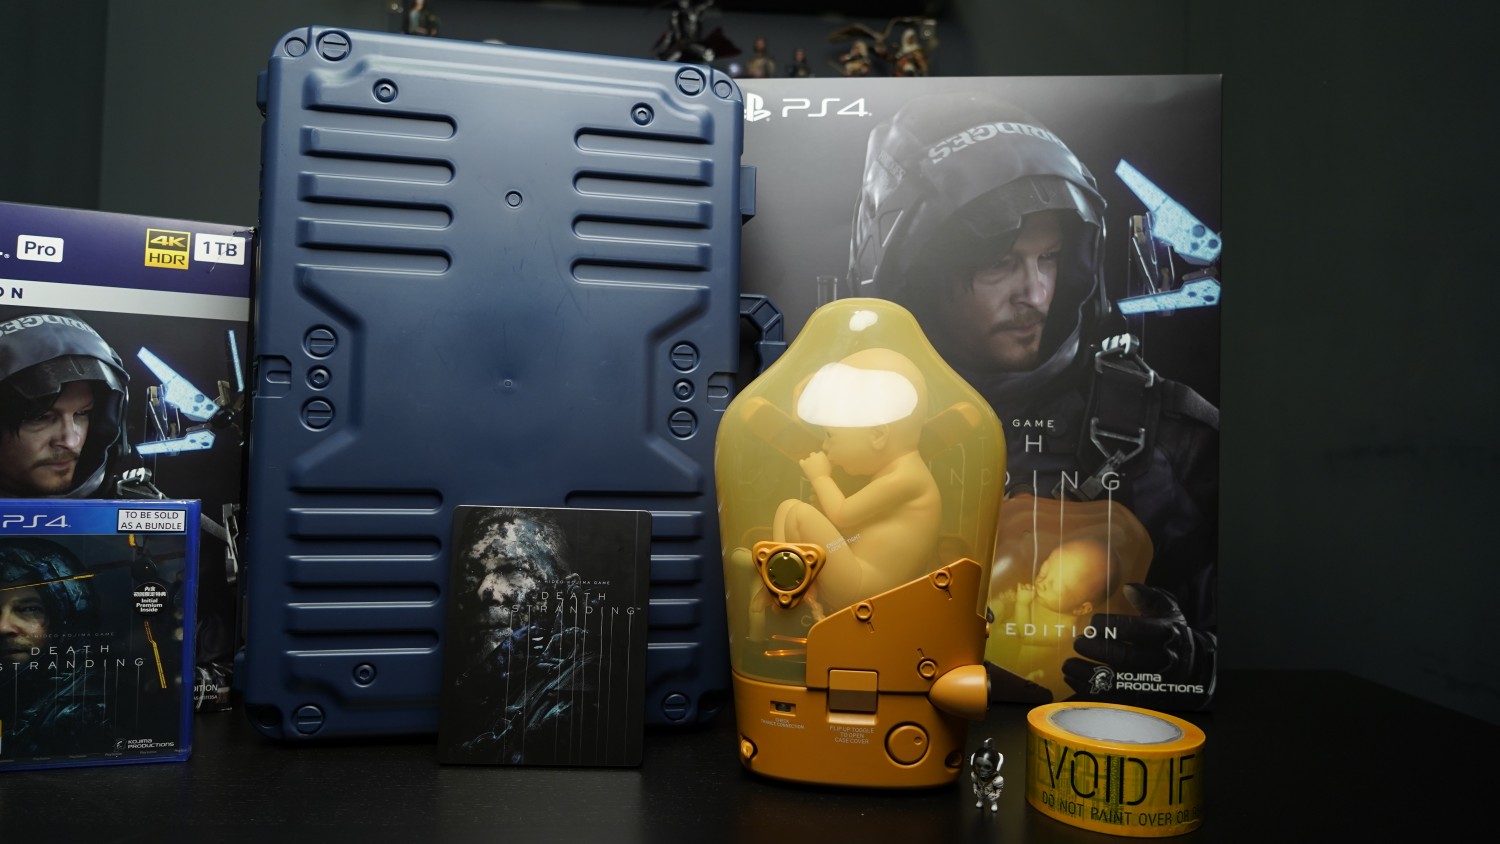 Death Stranding Limited Edition PS4 Pro Release Date and Preorder